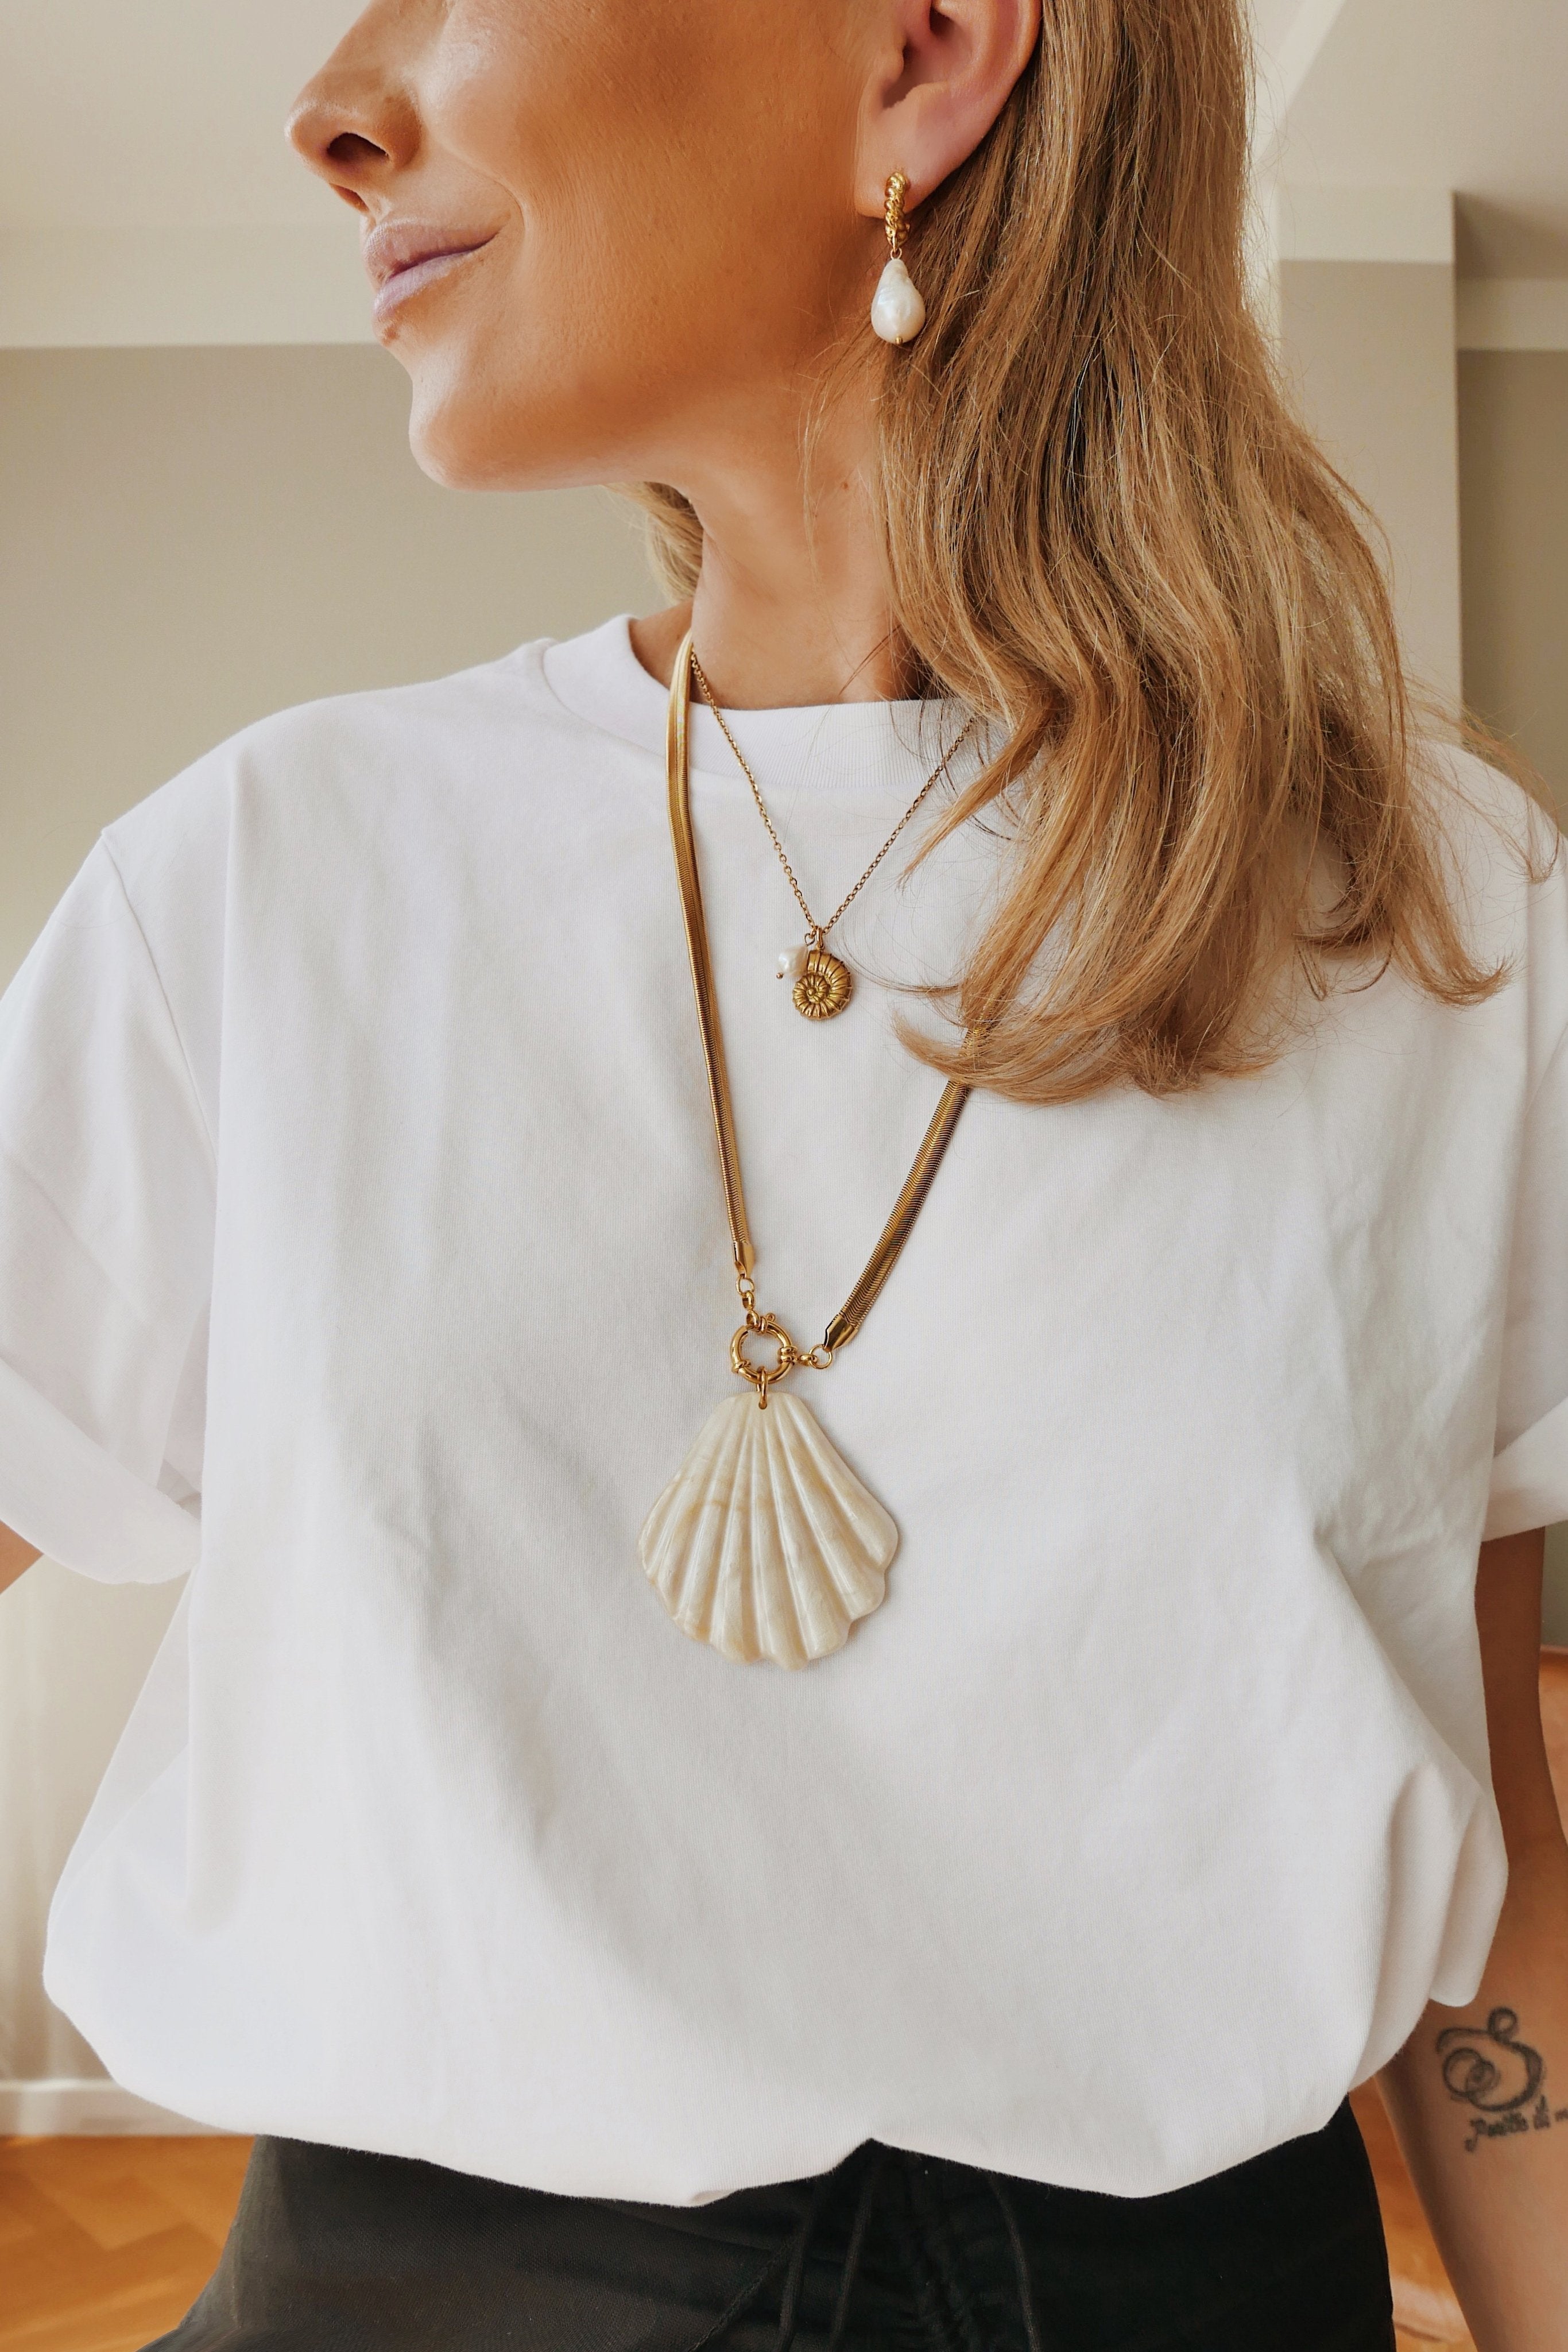 Francine Necklace - Boutique Minimaliste has waterproof, durable, elegant and vintage inspired jewelry